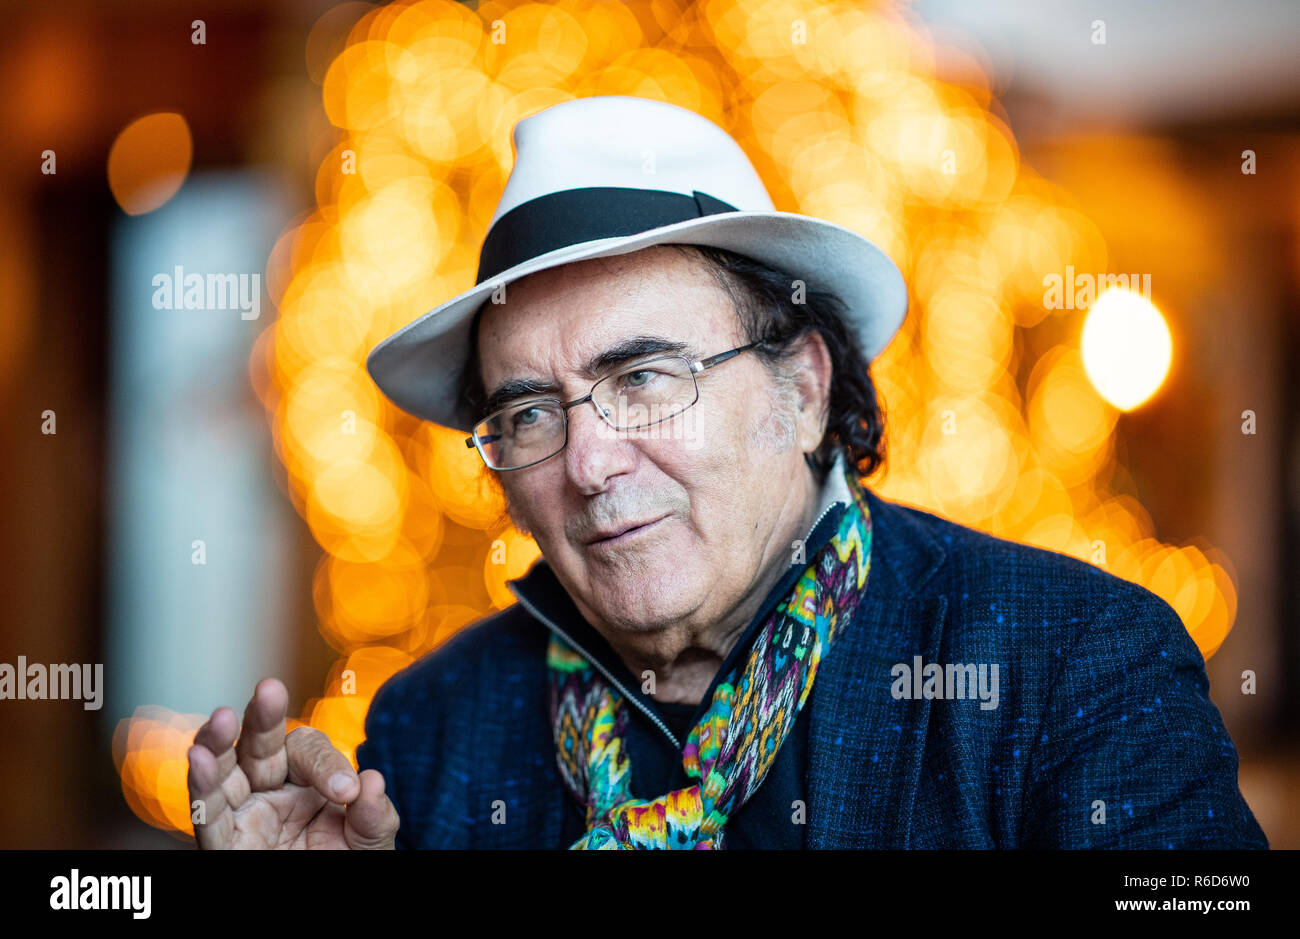 04 December 2018, North Rhine-Westphalia, Dortmund: Al Bano Carrisi sits  during an interview in the lobby of the Dorint Hotel in Dortmund. Al Bano  and Romina Power, dream couple of the Italo-Pop